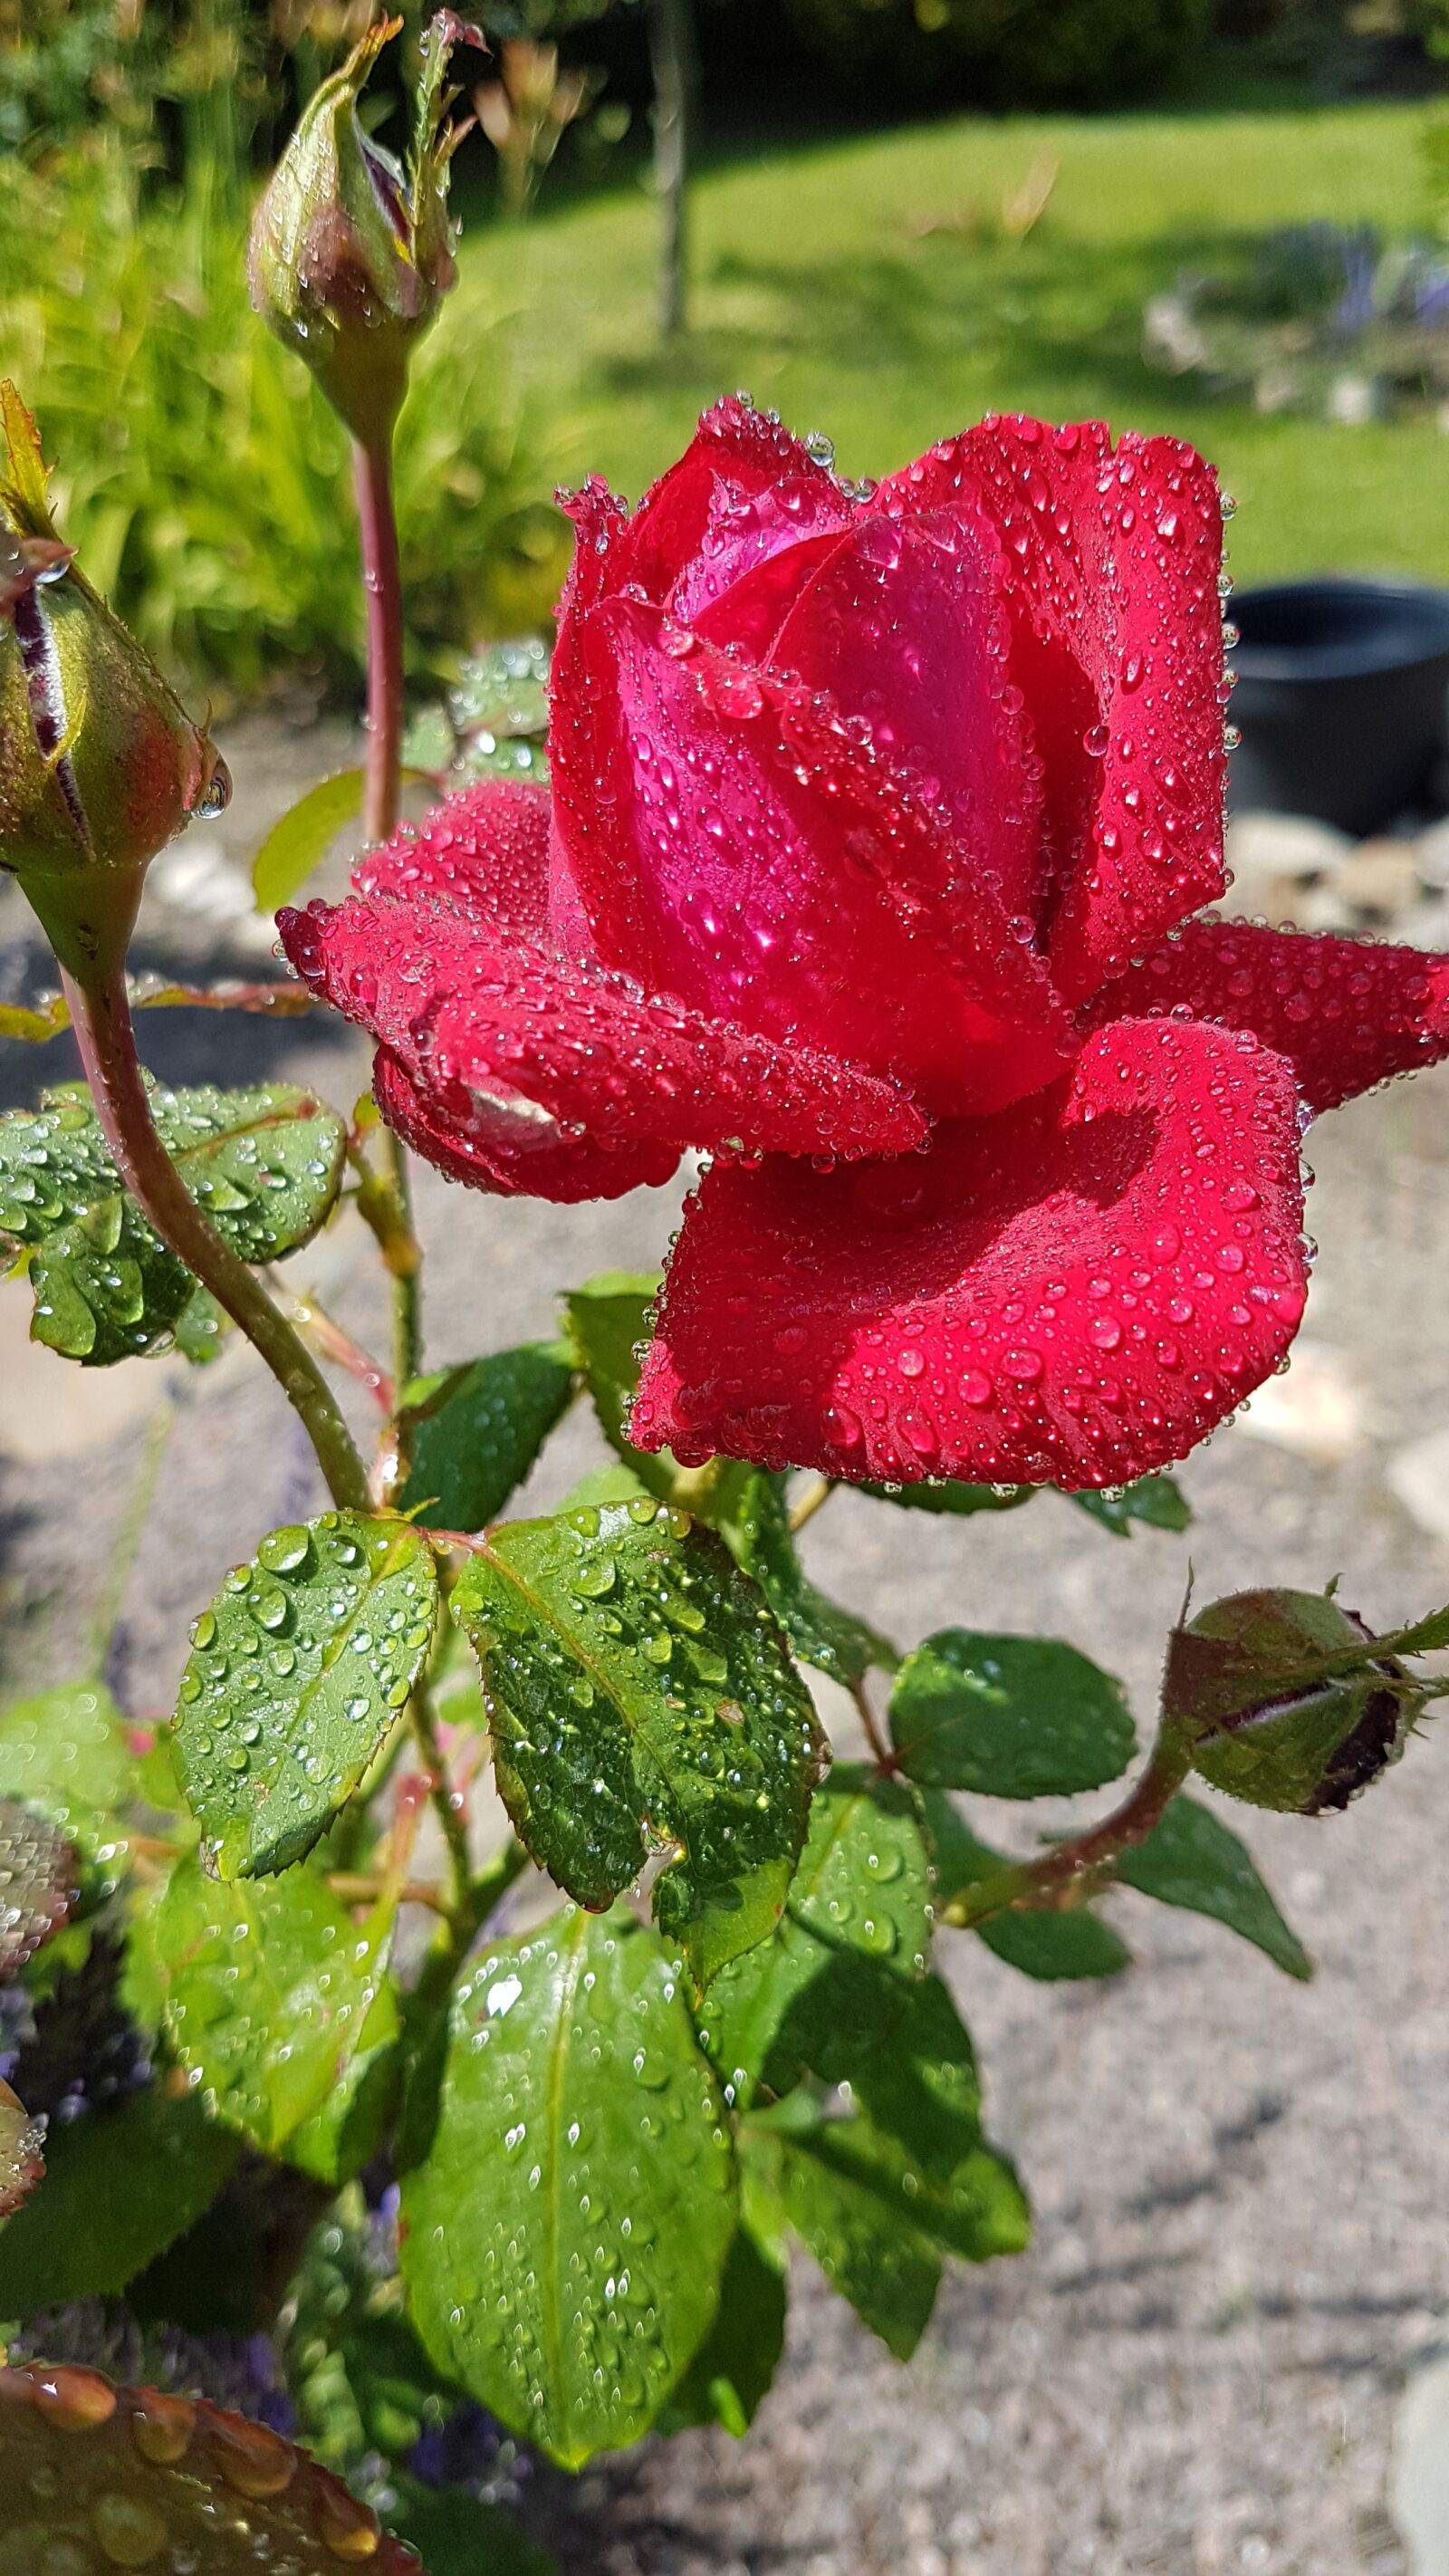 Samsung Galaxy S7 sample photo. Rose, flower, nature photography